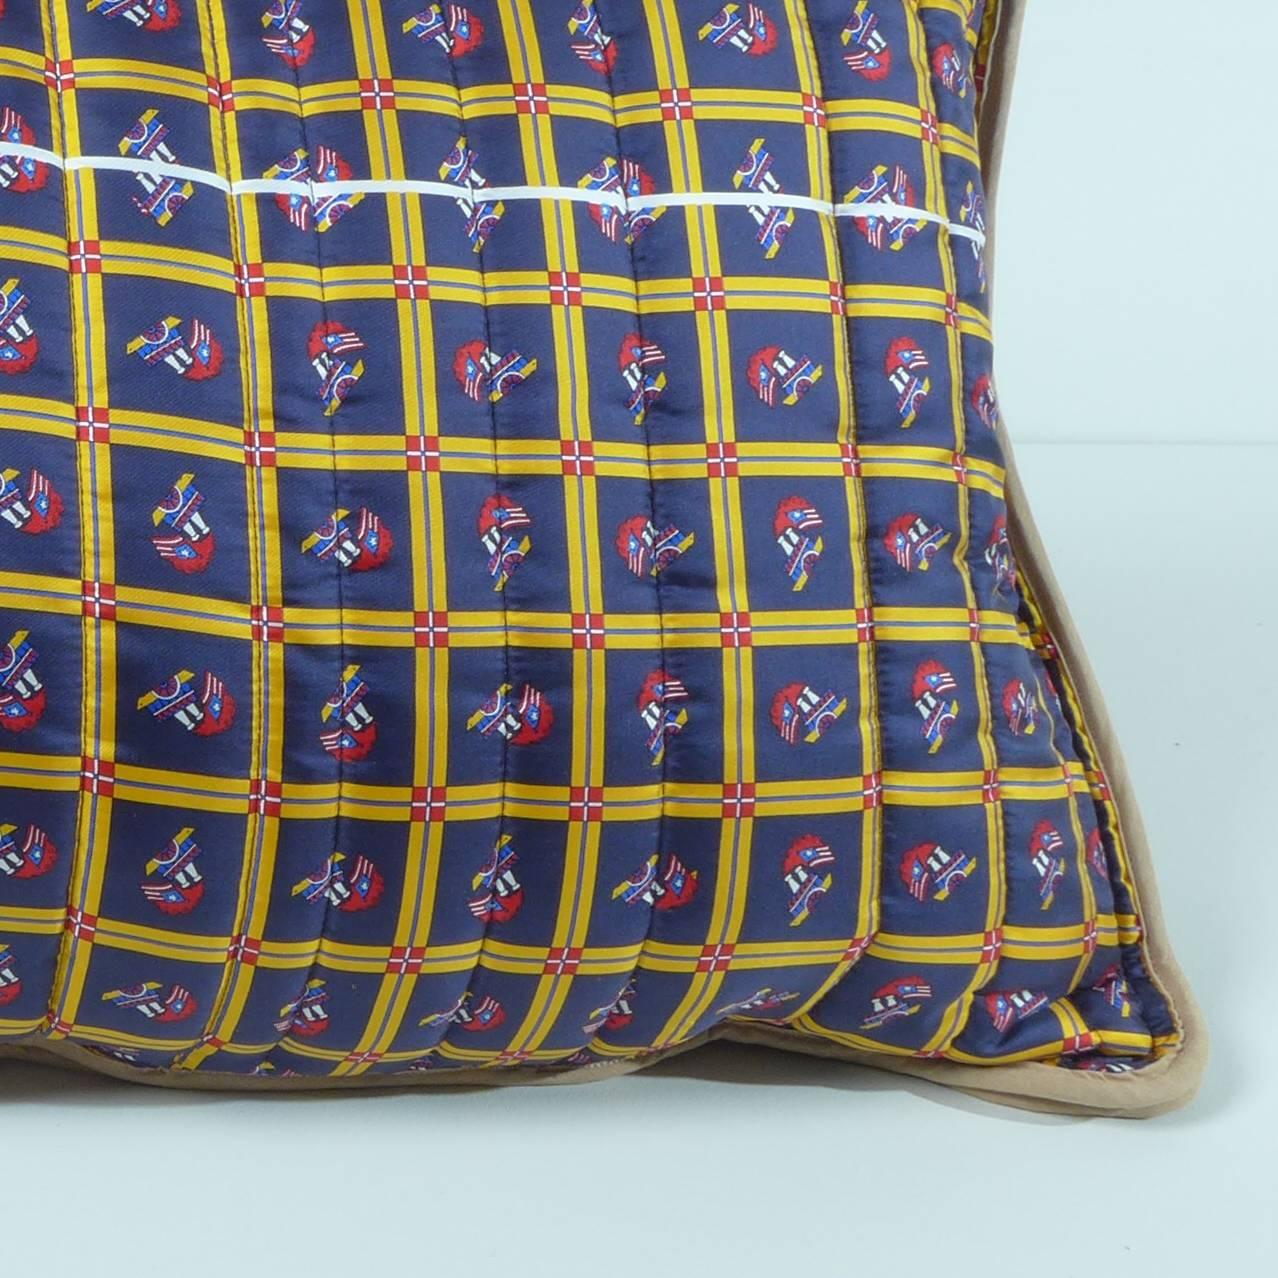 This one of a kind quilted pillow is made from vintage silk fabrics rescued from Spazio Rossana Orlandi in Milan, a former tie factory. Both Byborre and Piet Hein Eek share the design ethos of repurposing material as an aesthetic solution. 100% silk